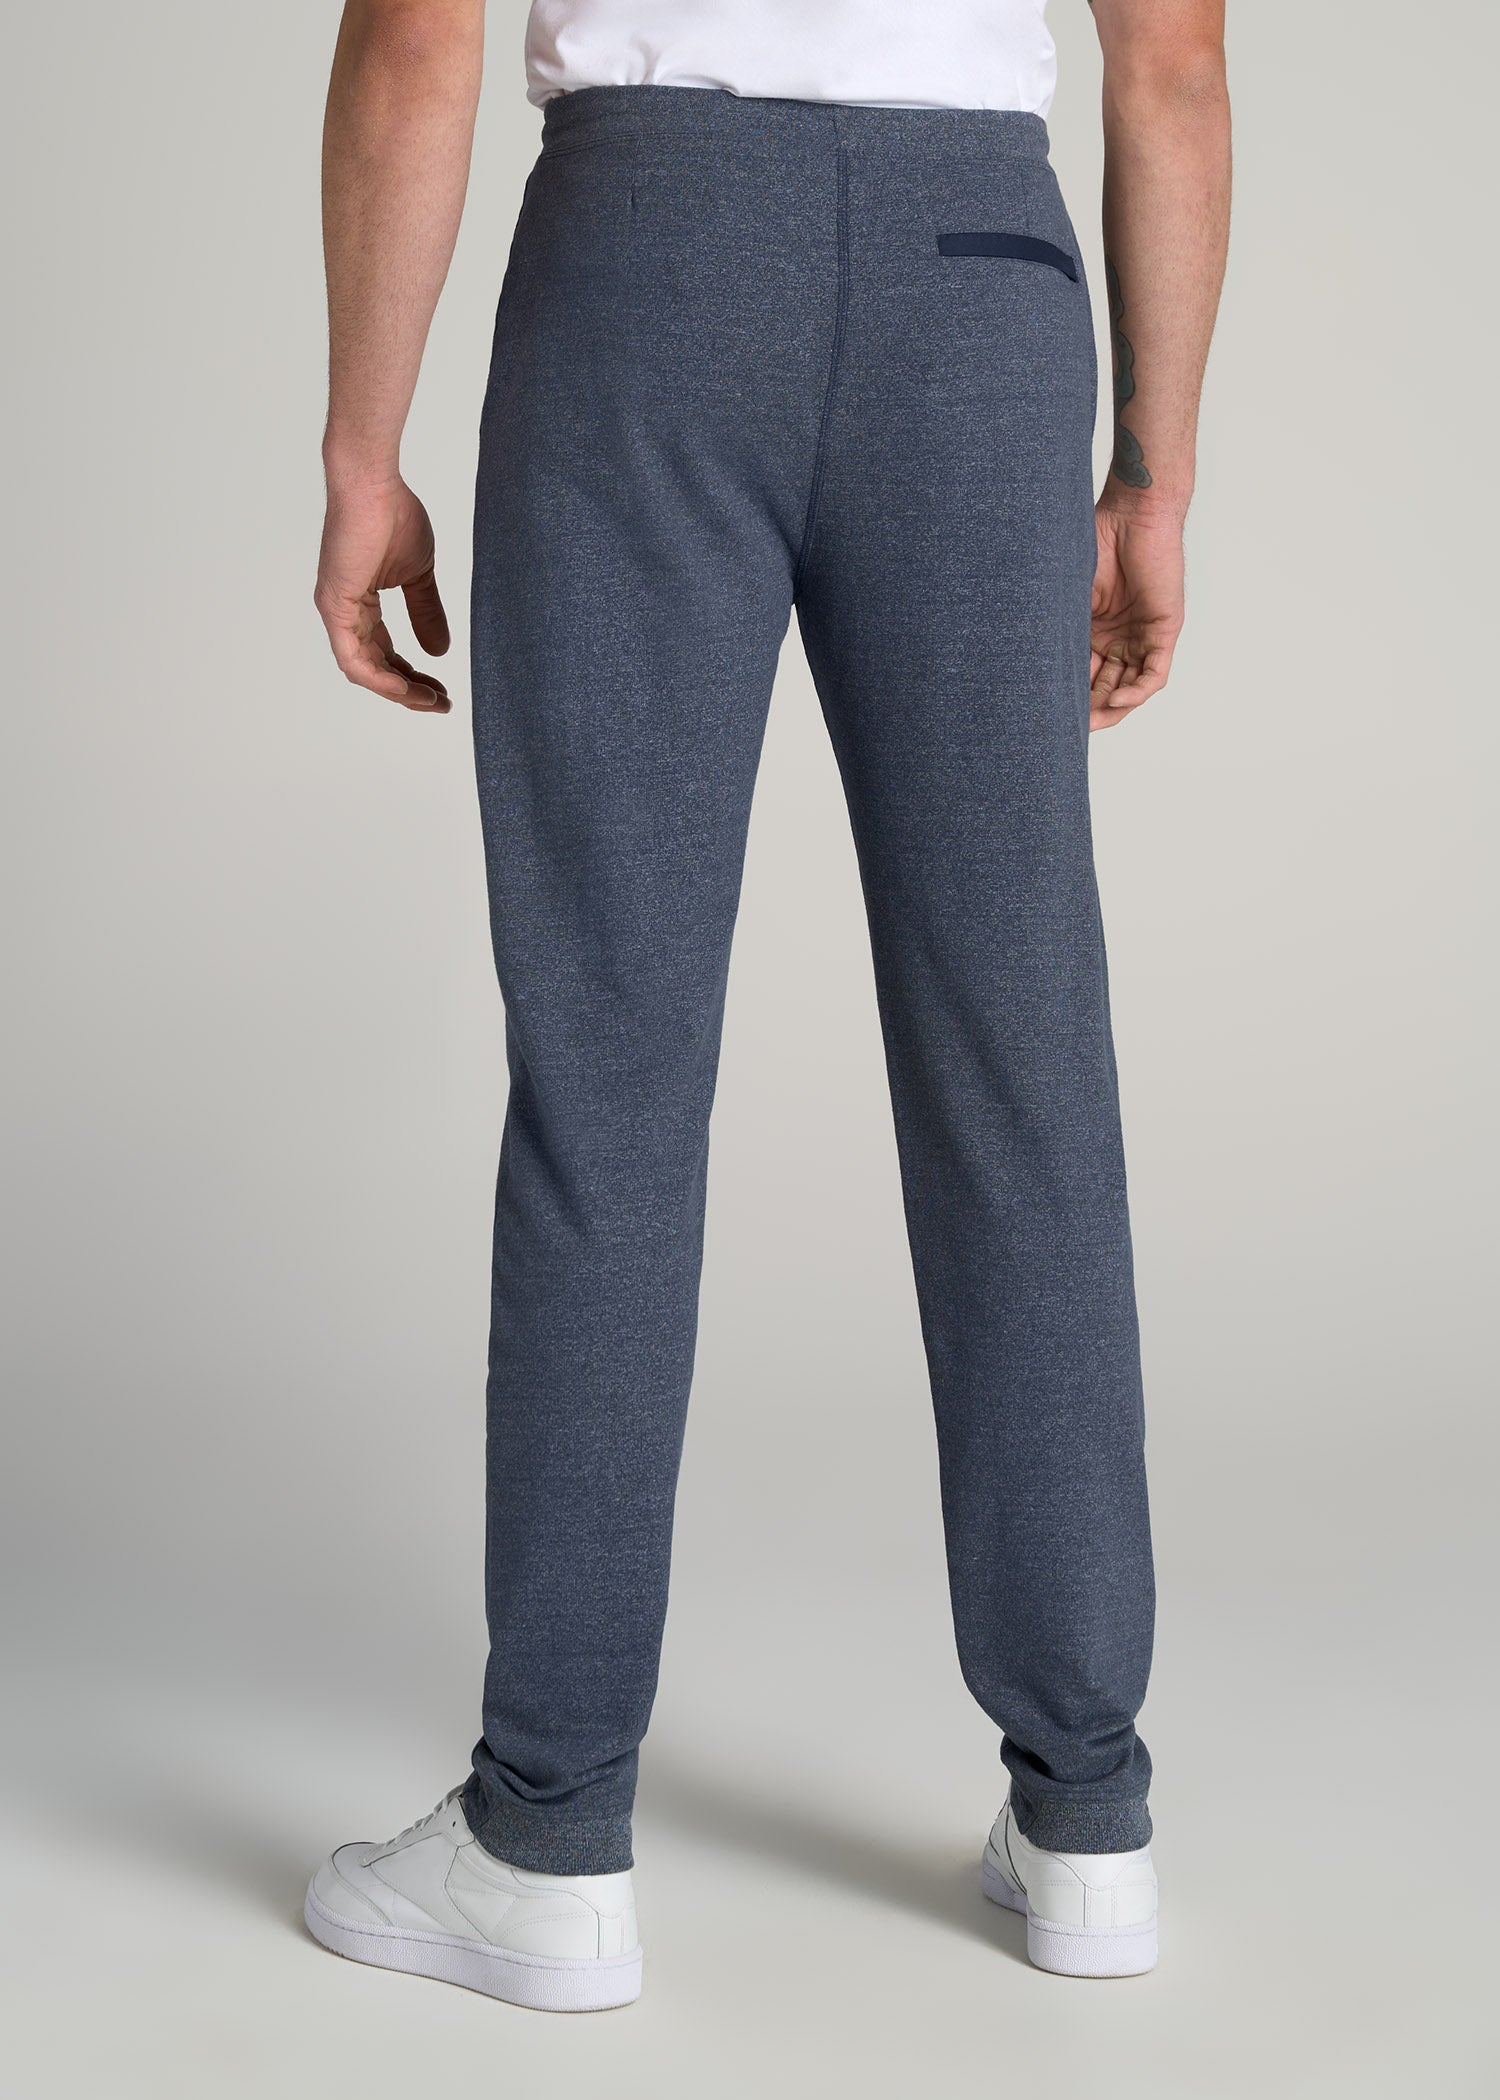       American-Tall-Men-Microsanded-French-Terry-Sweatpant-Navy-Mix-back